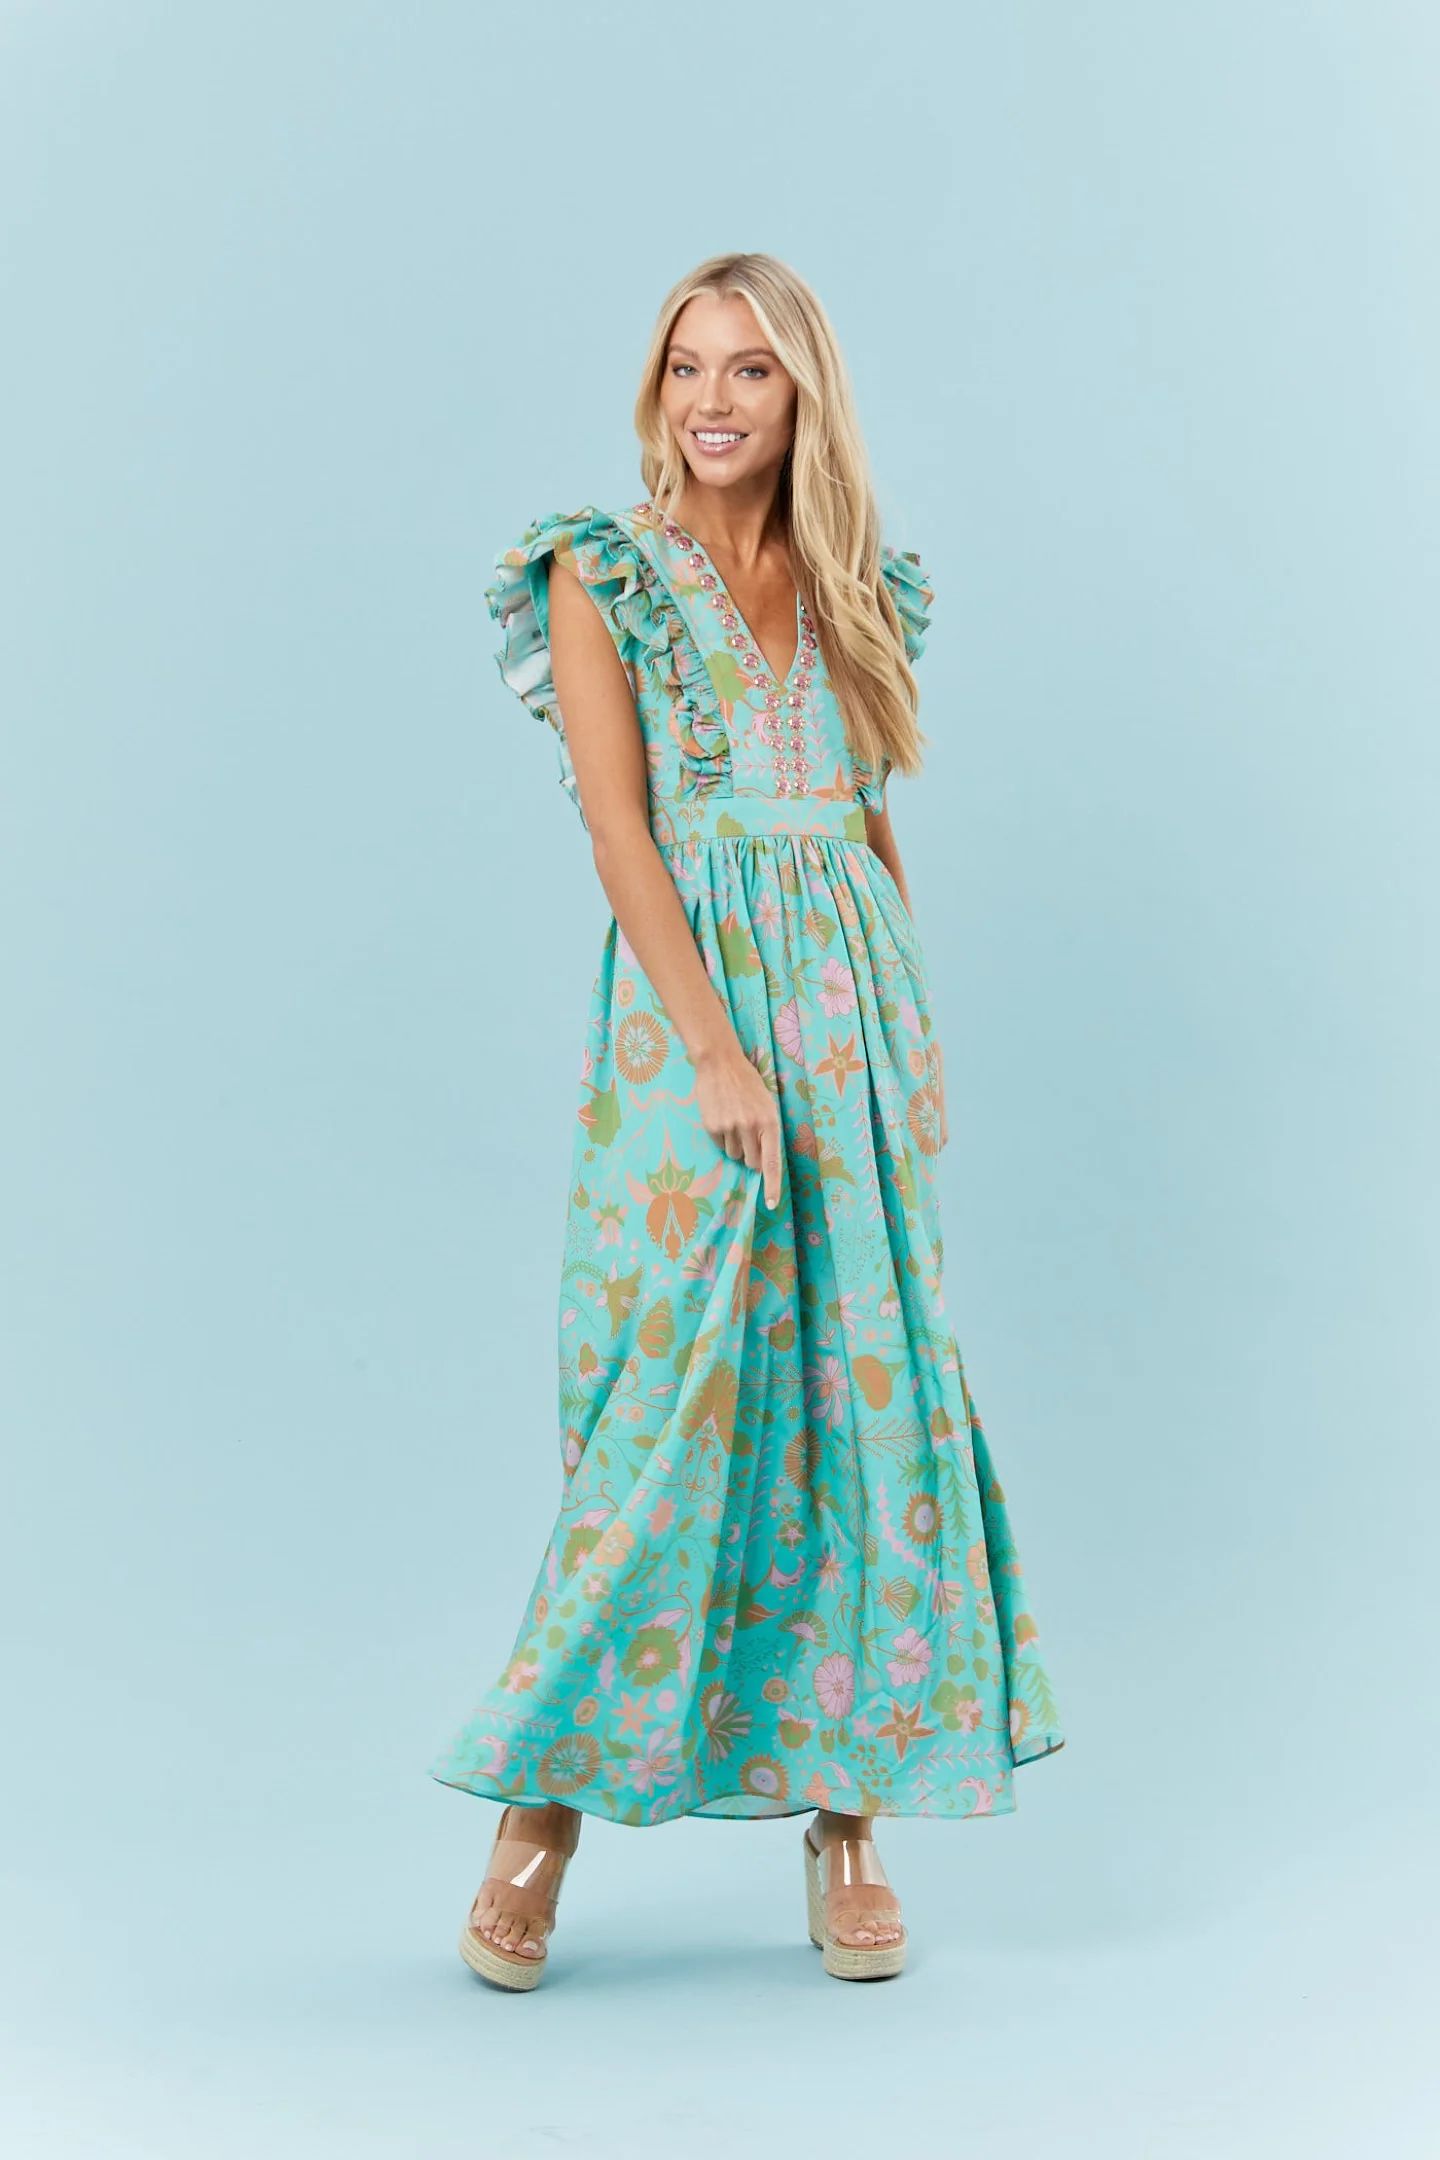 Sheridan French I Spring 2023 I Stacey Dress in Green Floral | Sheridan French